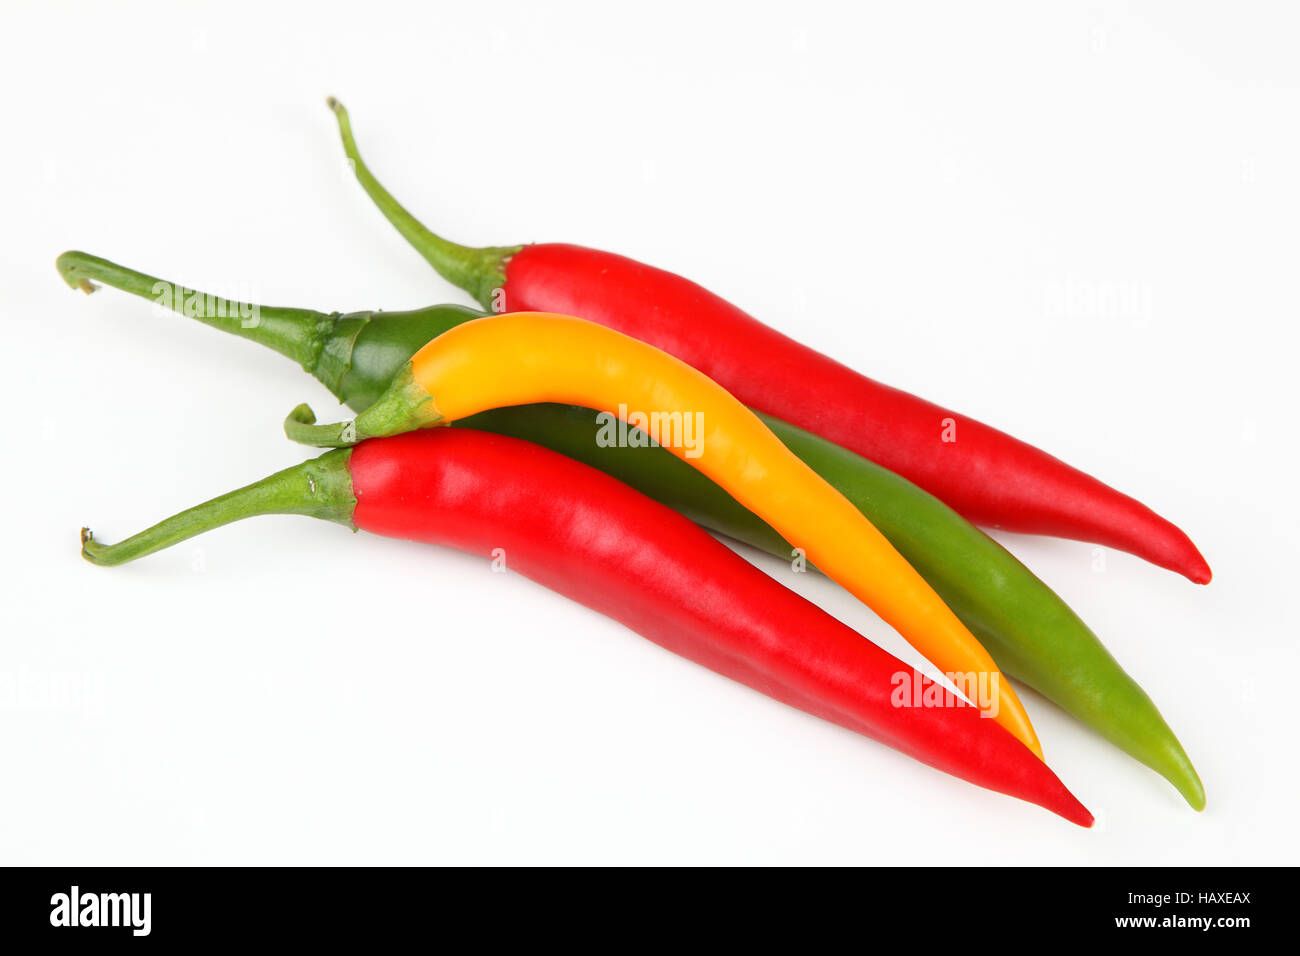 Yellow hot chilli pepper Cut Out Stock Images & Pictures - Page 3 - Alamy